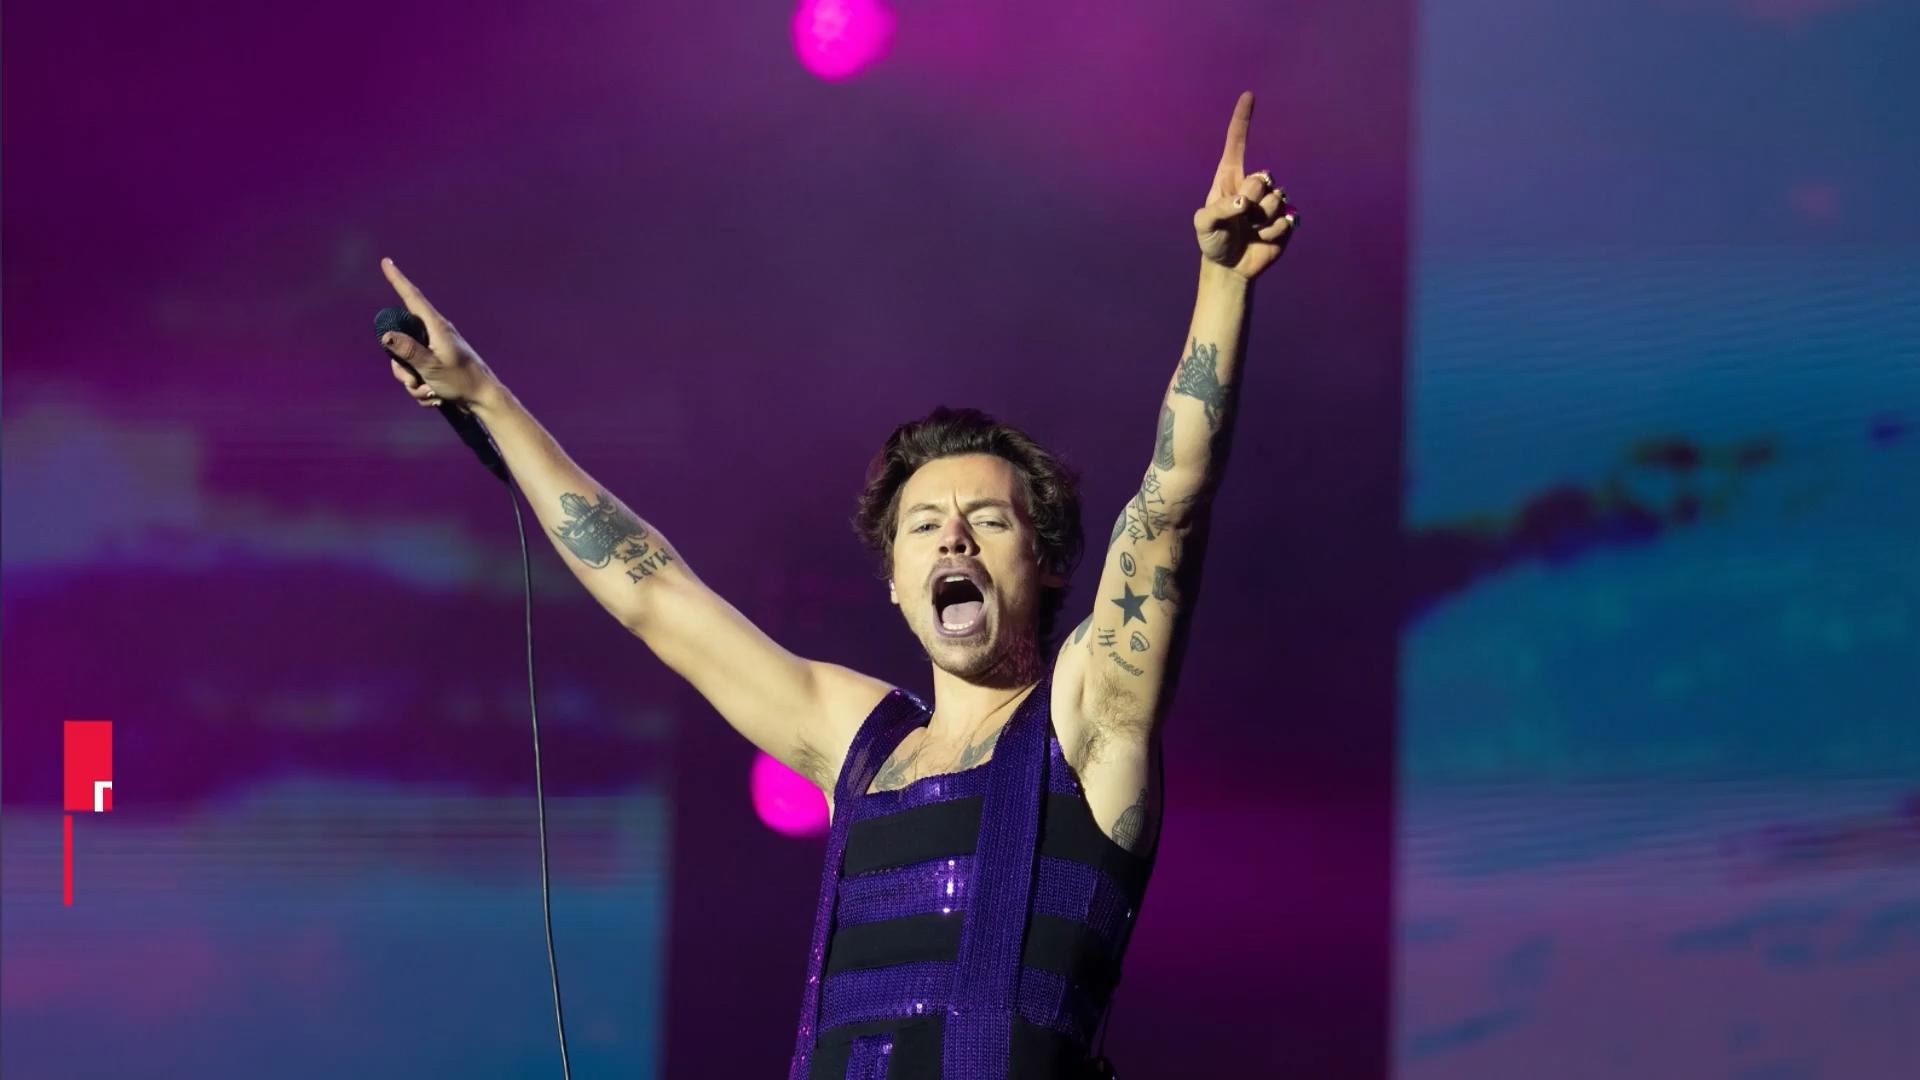 Harry Styles helps fans get out live on stage